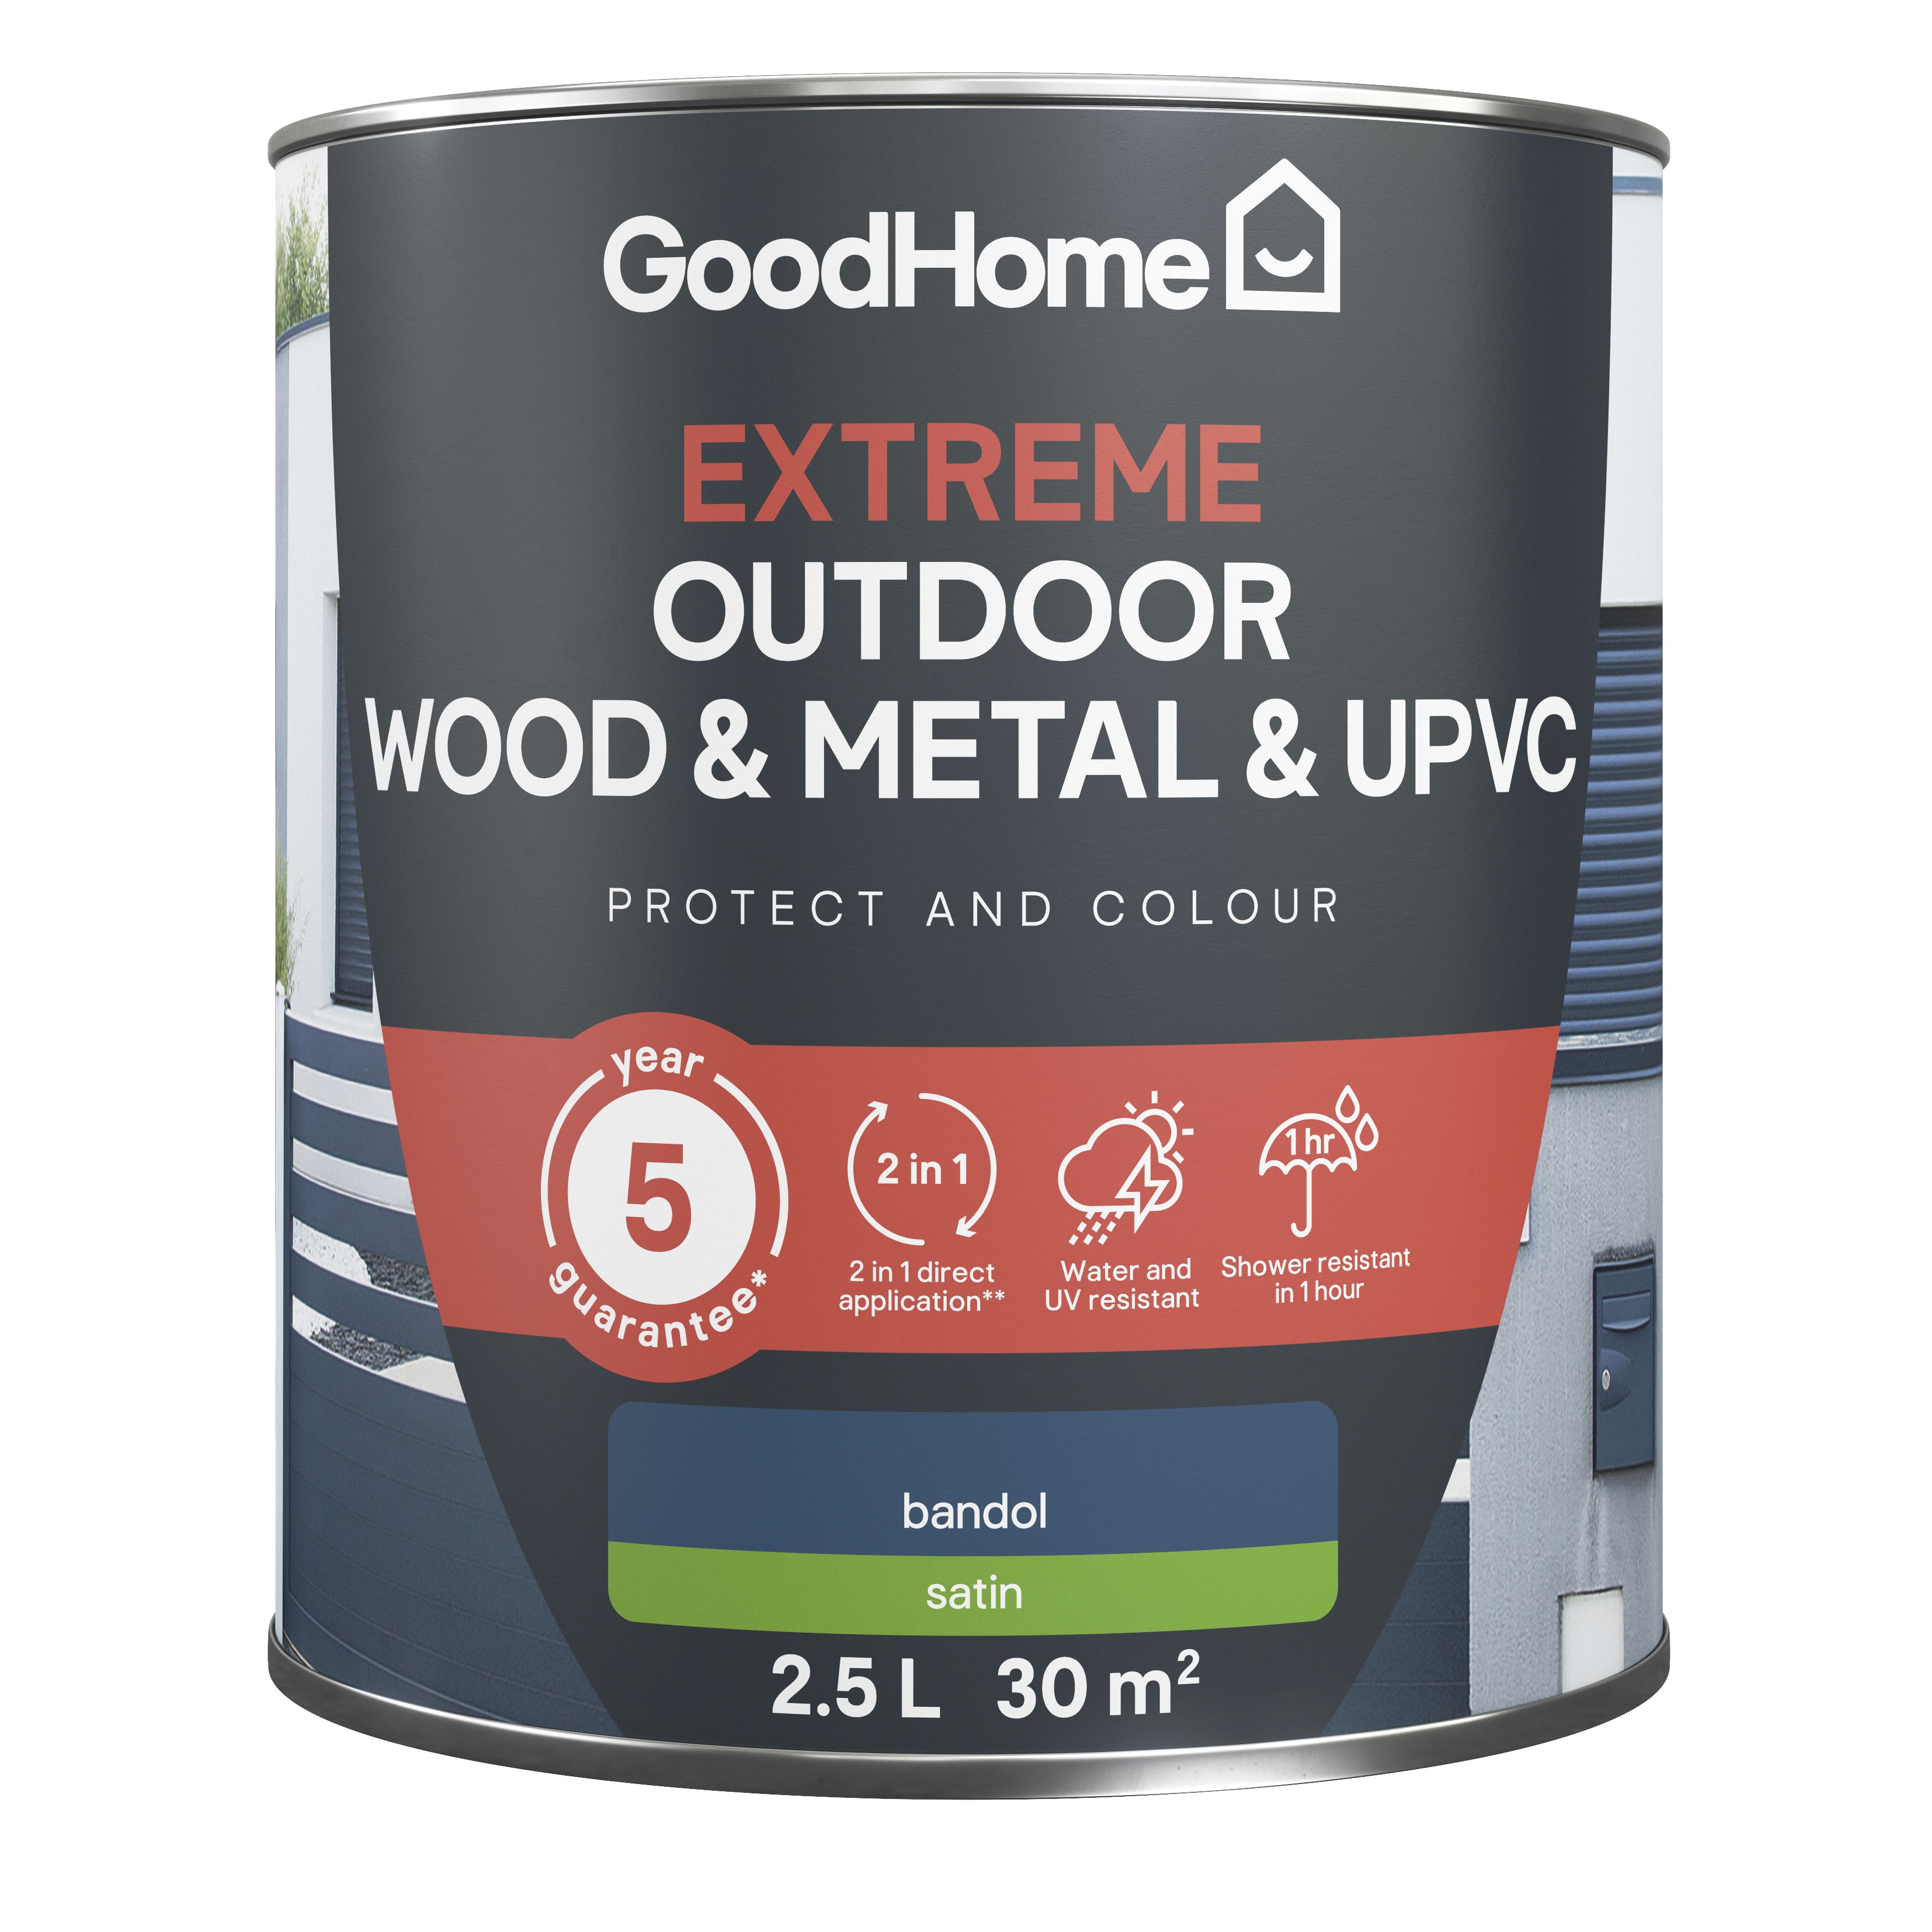 GoodHome Extreme Outdoor Bandol Satinwood Multi-surface paint, 2.5L